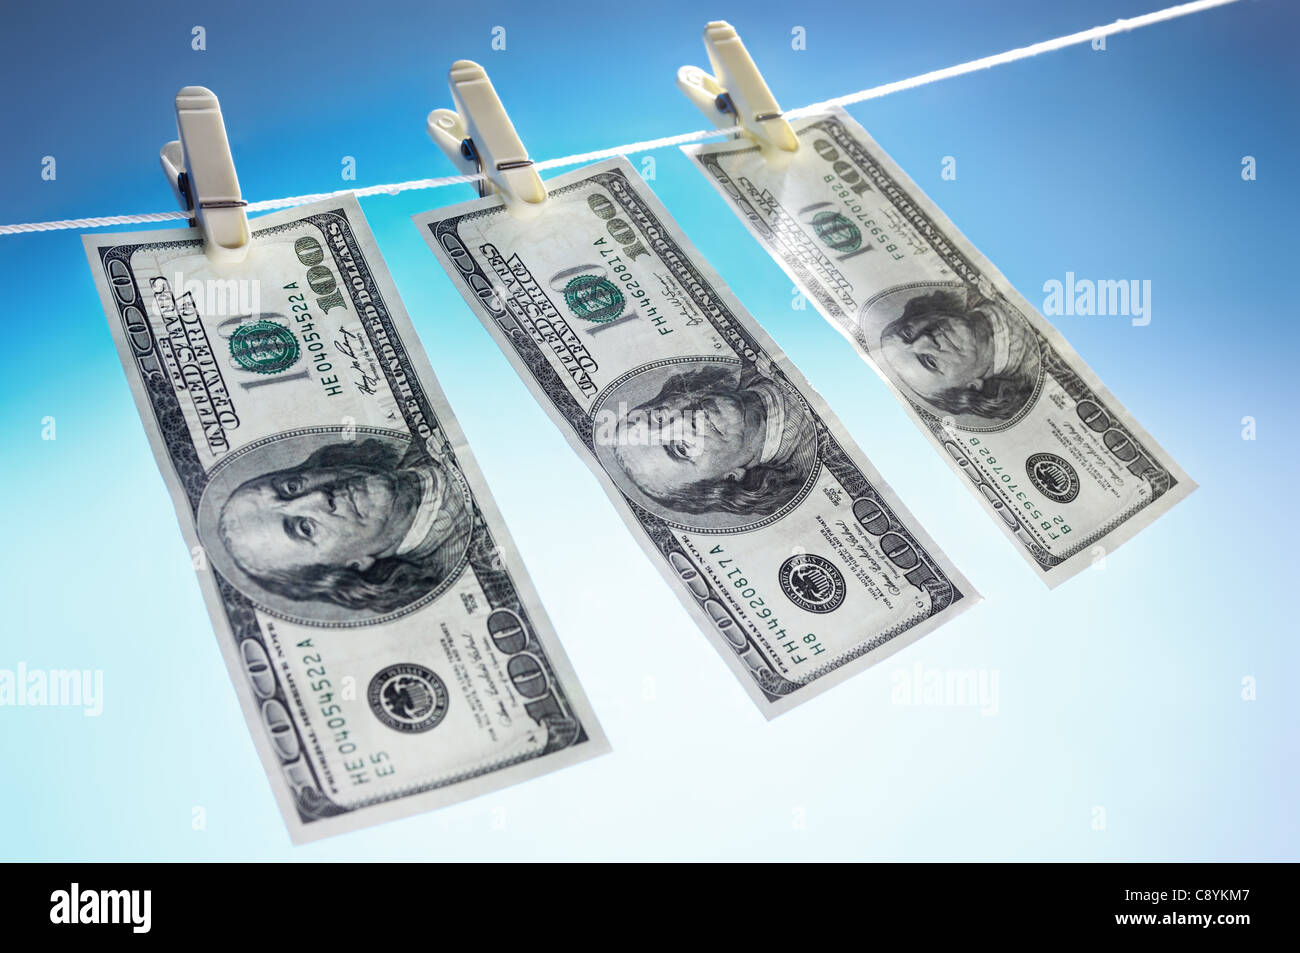 Hundred dollar bills drying on a clothes line isolated on blue sky background Money laundering concept Stock Photo